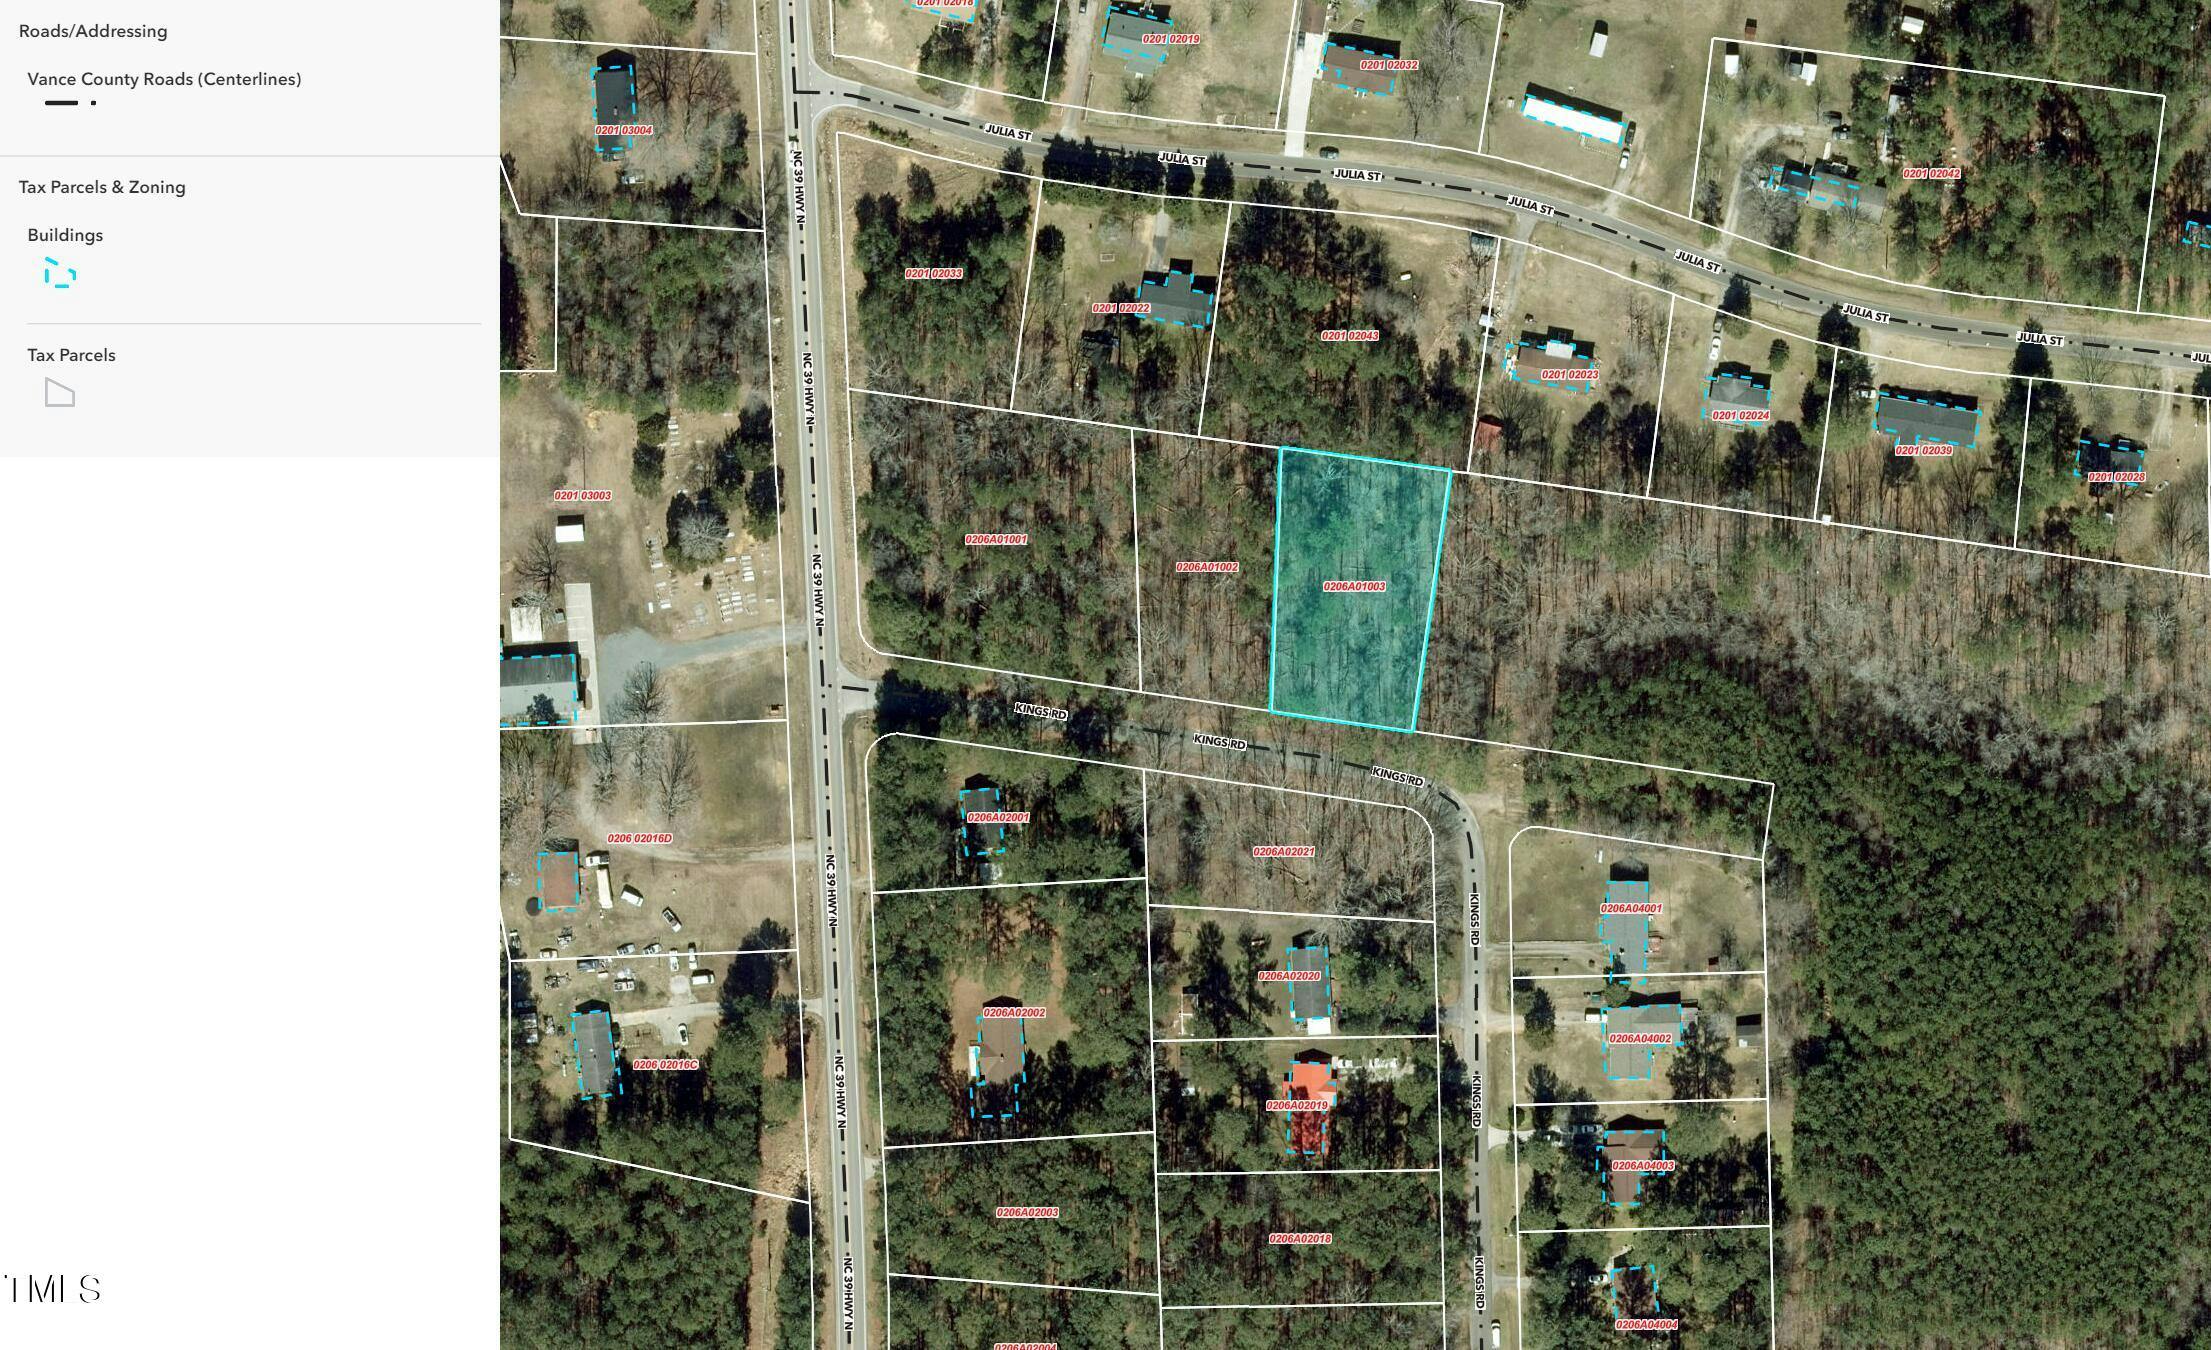 Vance County Tax Parcel Viewer 0206A0100